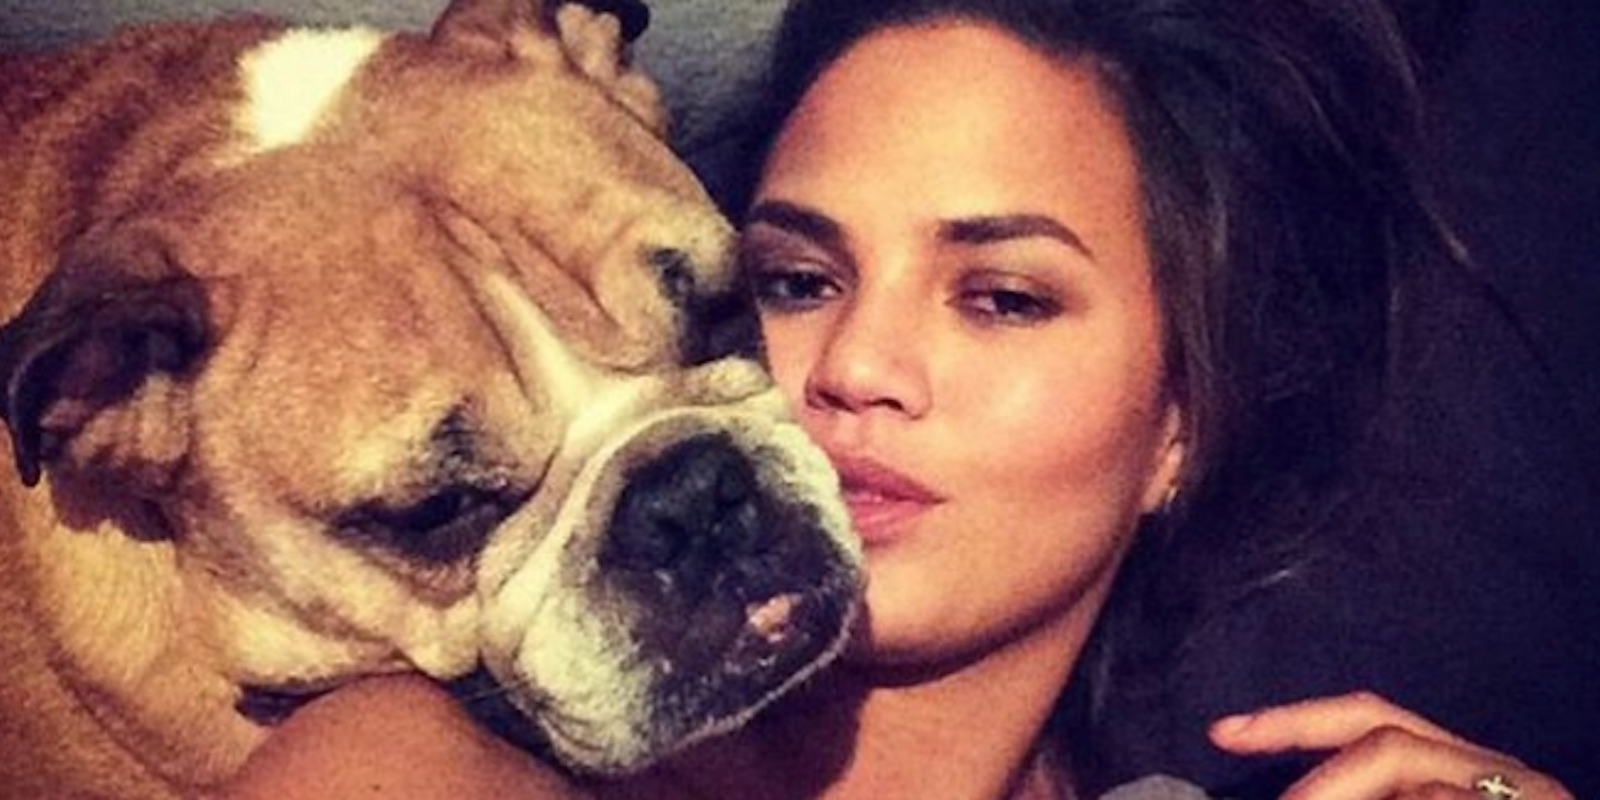 Chrissy Teigen lounges on a bed for a selfie with her English bulldog Puddy